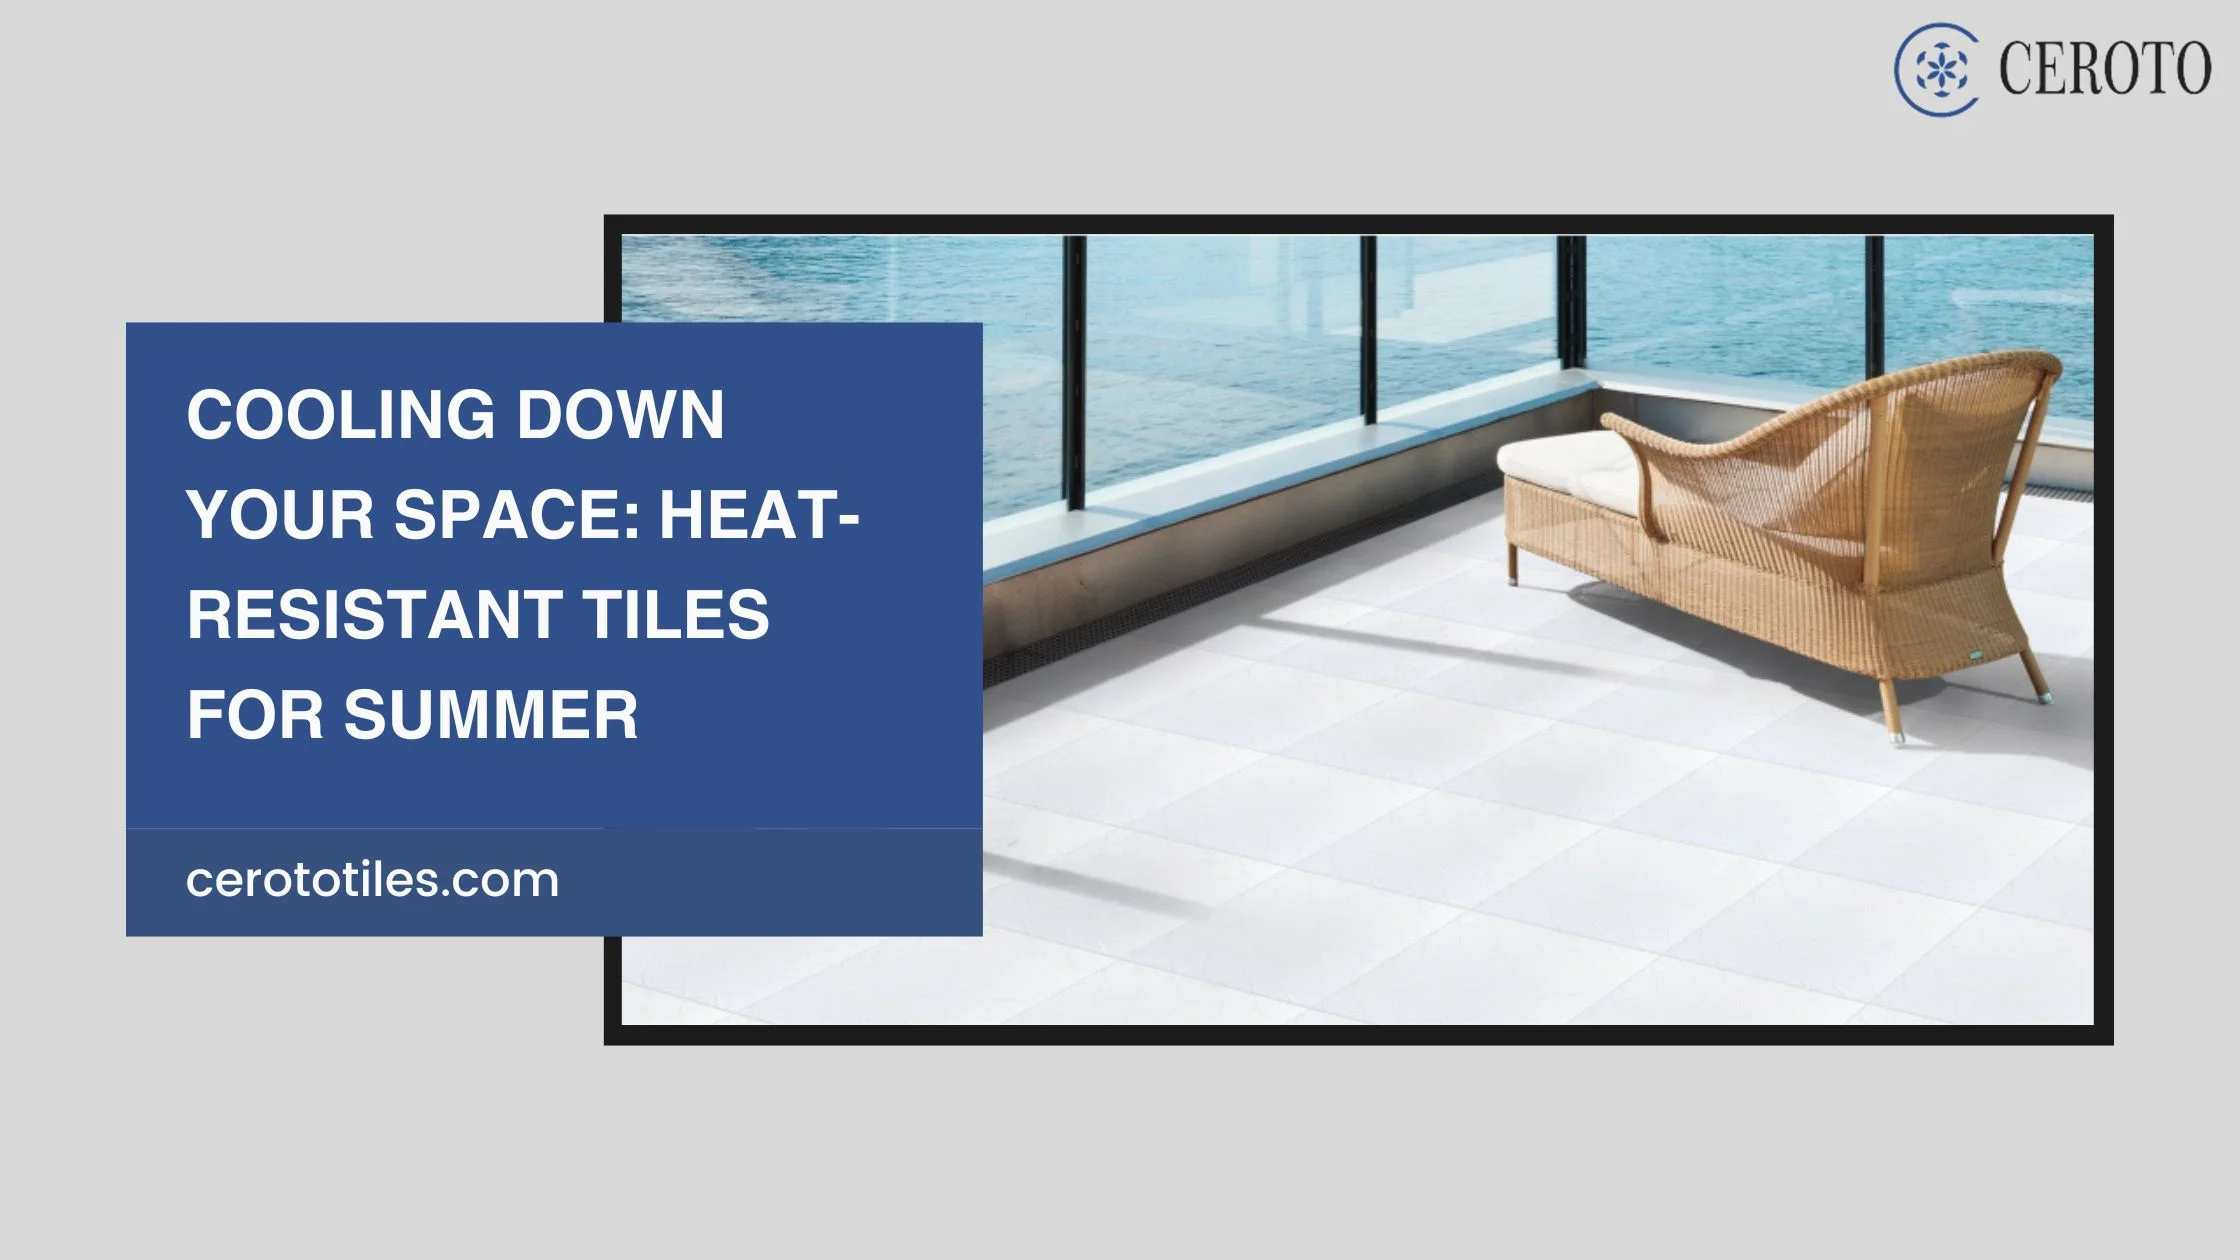 Cooling Down Your Space: Heat-resistant Tiles For Summer